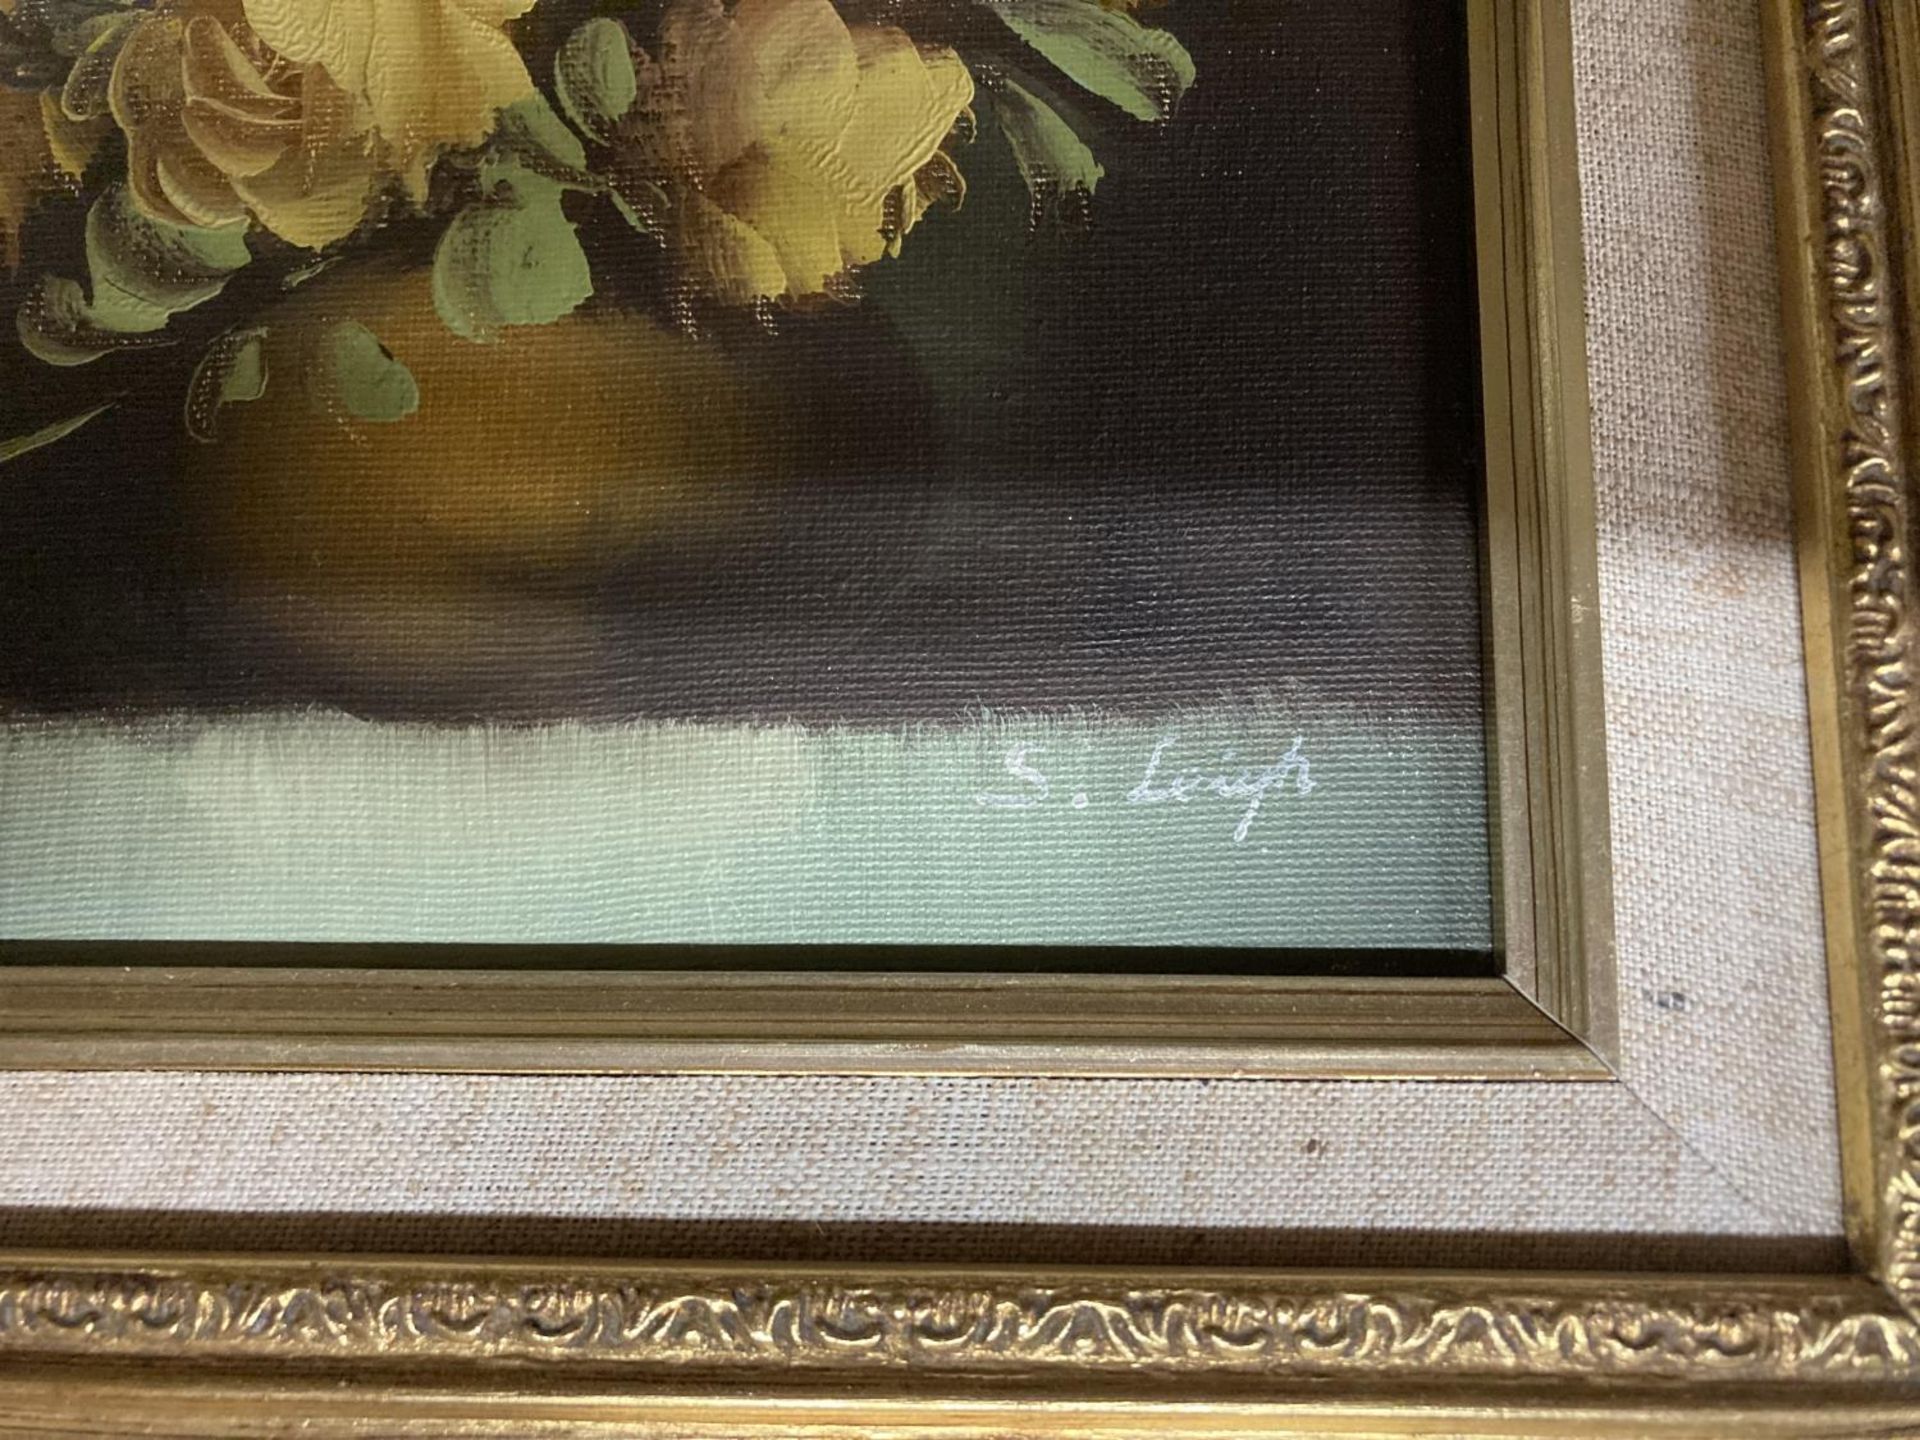 A 19TH CENTURY GILT FRAMED STILL LIFE OIL PAINTING BY EDWARD GEORGE HANDEL LUCAS, SIGNED E.G.H LUCAS - Image 5 of 6